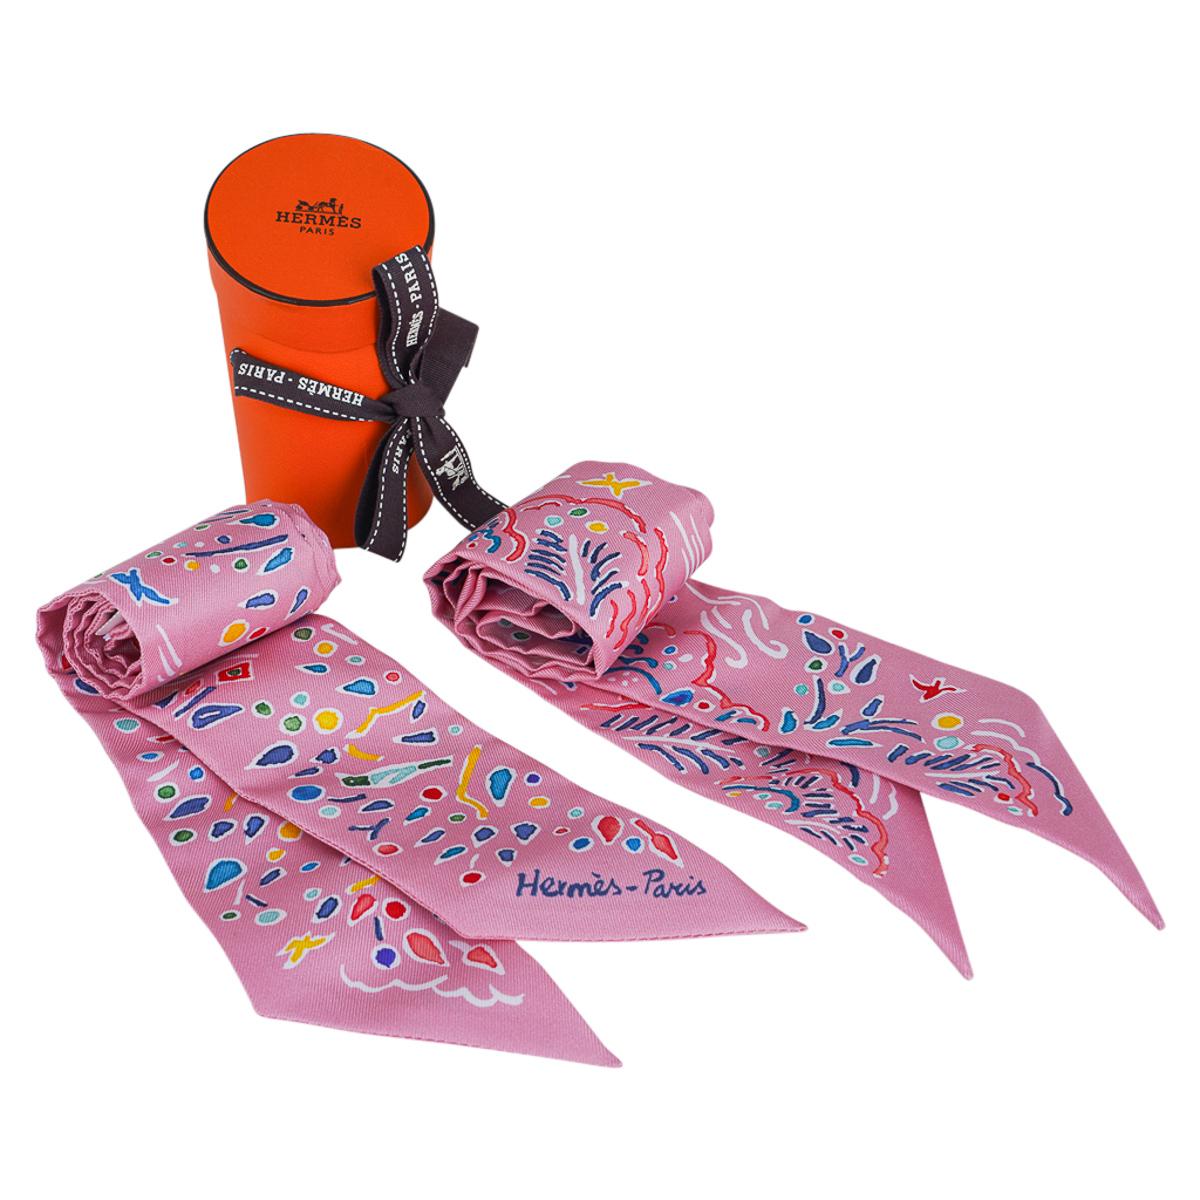 Mightychic offers a set of two (2) Hermes Isola de Primavera  Twilly set of two (2).
Featured in Rose, Bleu and Multicolore colorway.
Designed by Matthieu Cosse. 
Comes with signature Hermes box and ribbon.
NEW or NEVER WORN.
final sale

SIZE:
32